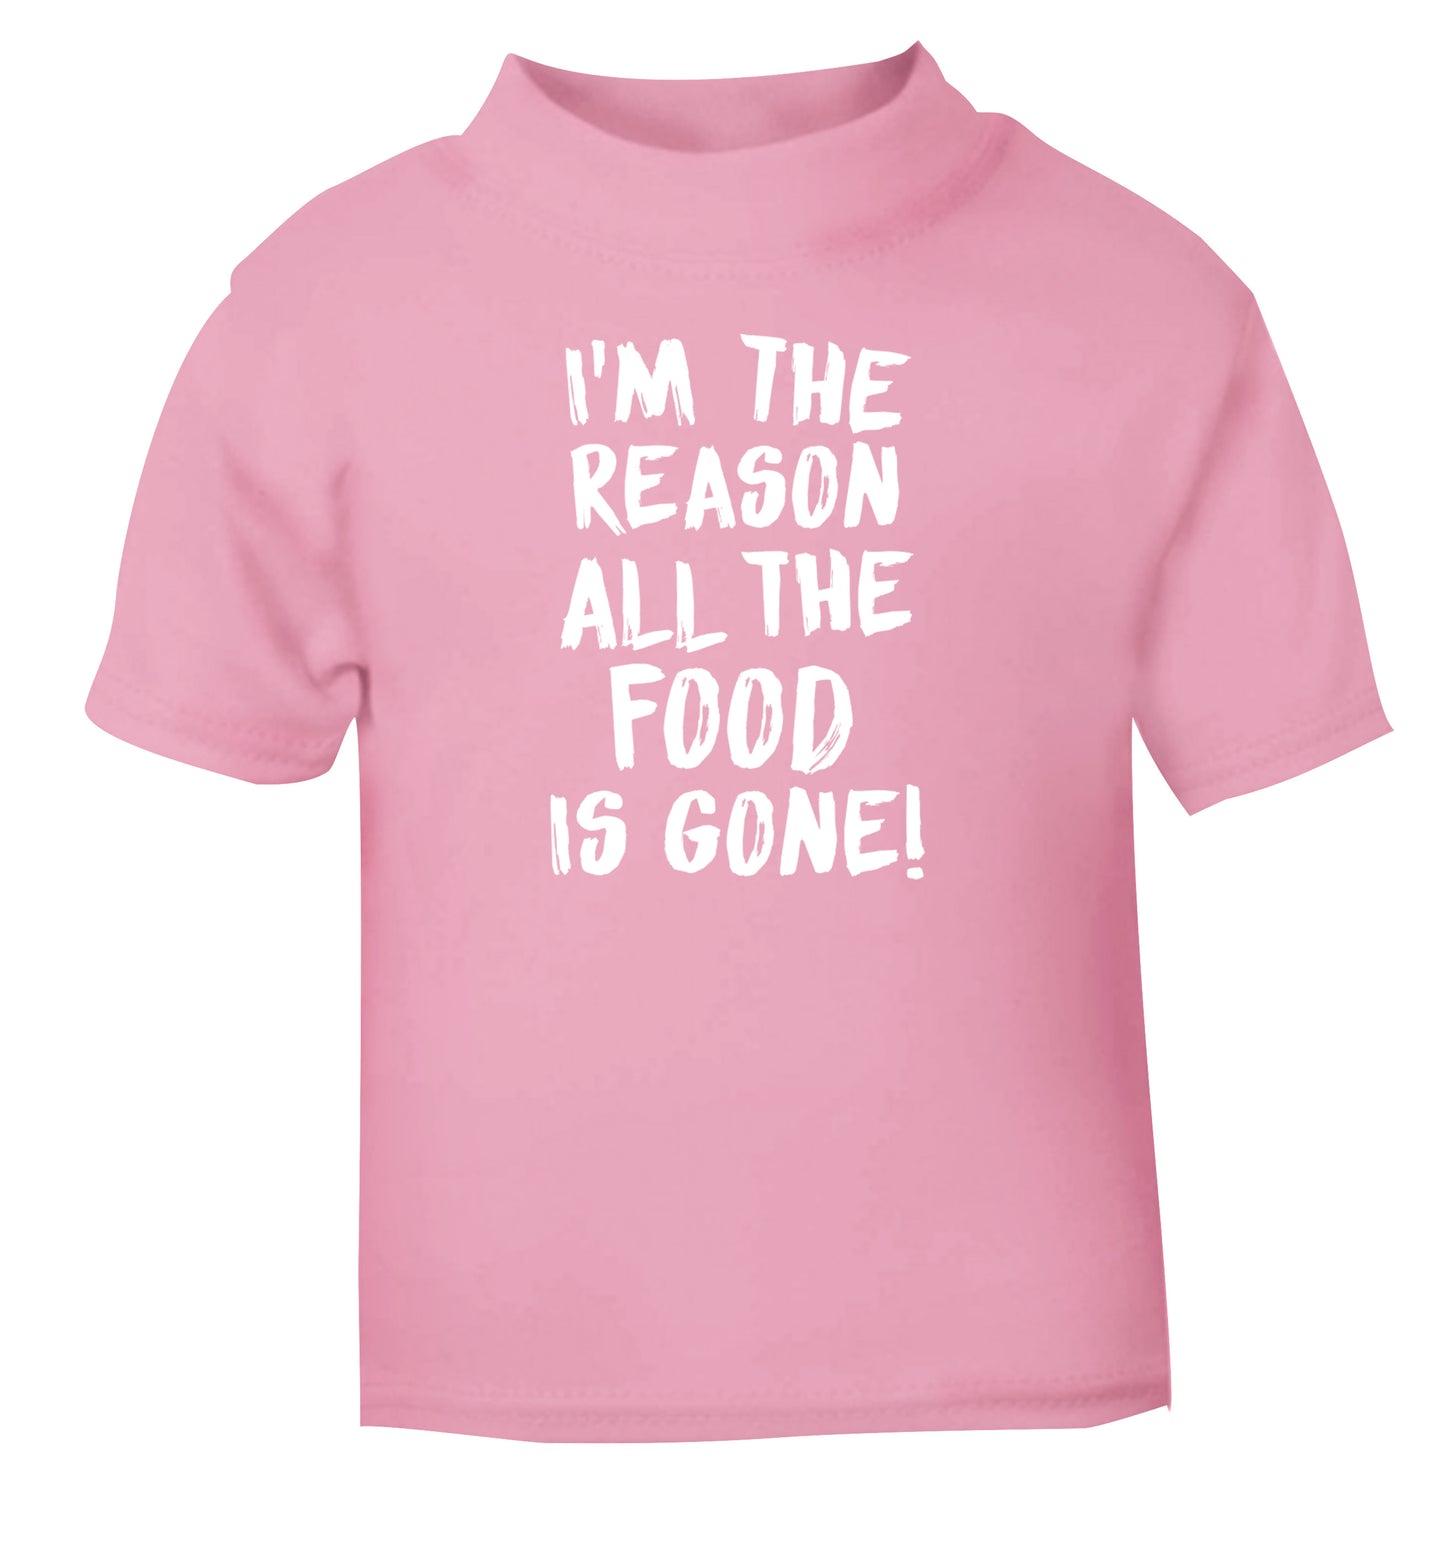 I'm the reason why all the food is gone light pink Baby Toddler Tshirt 2 Years